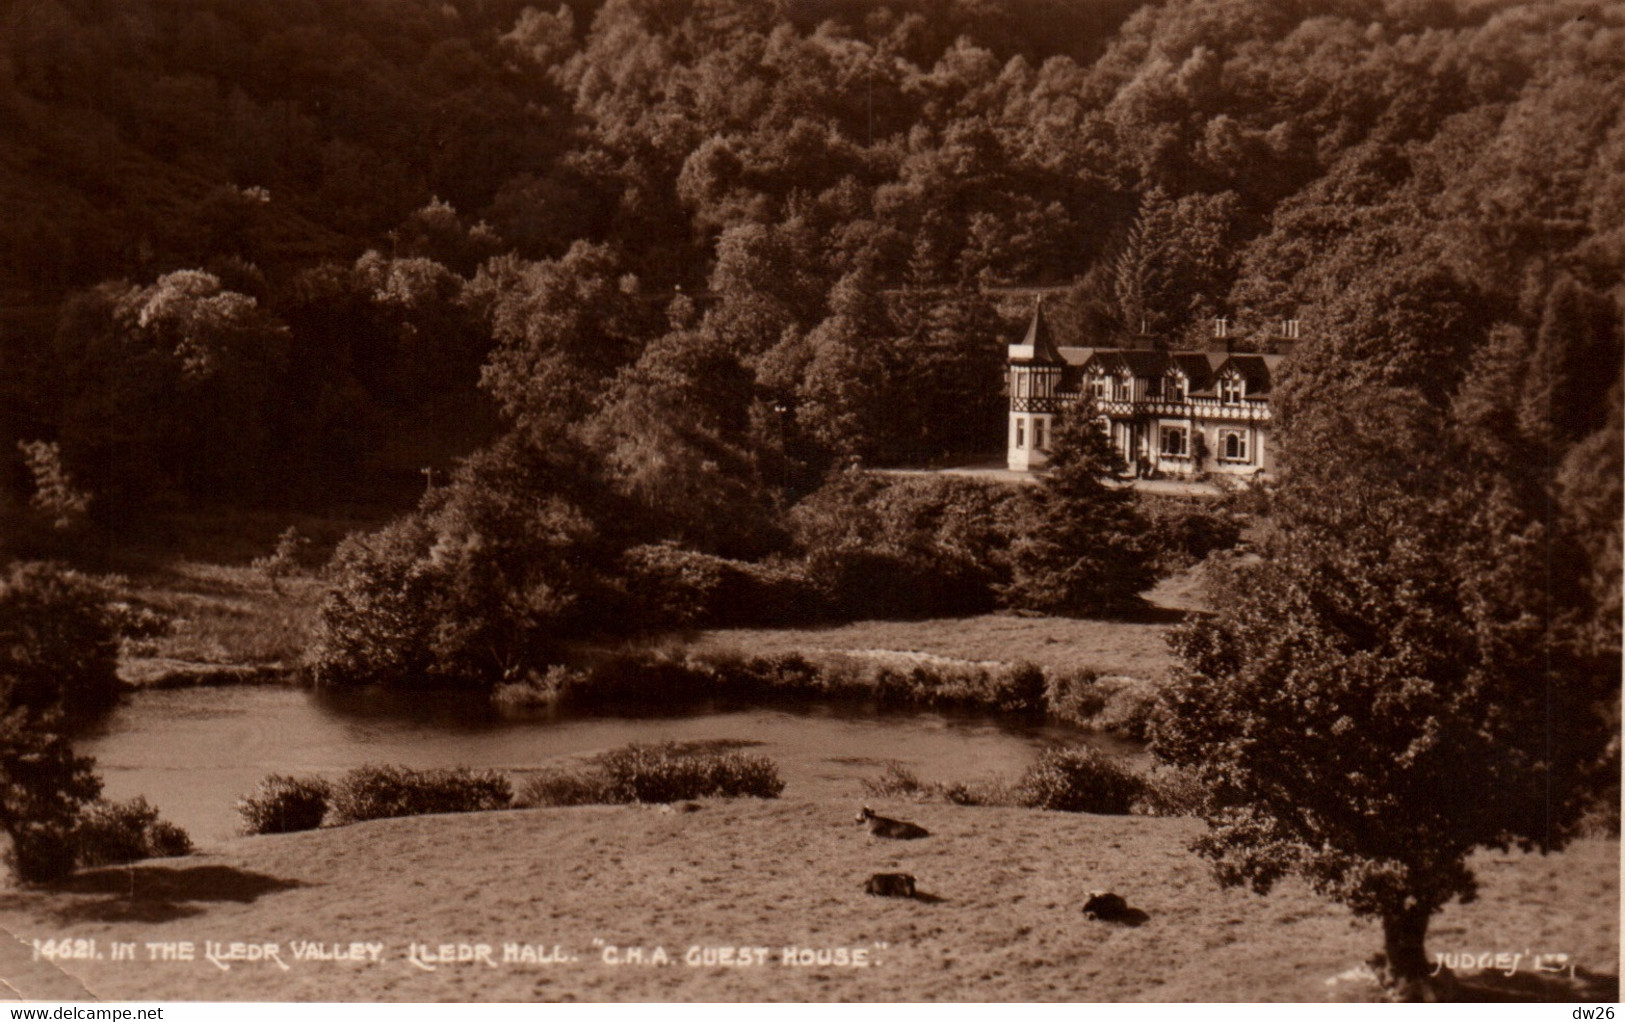 Pays De Galles (Wales) In The Lledr Valley, Lledr Hall - C.H.A. Guest House 1938 - Caernarvonshire